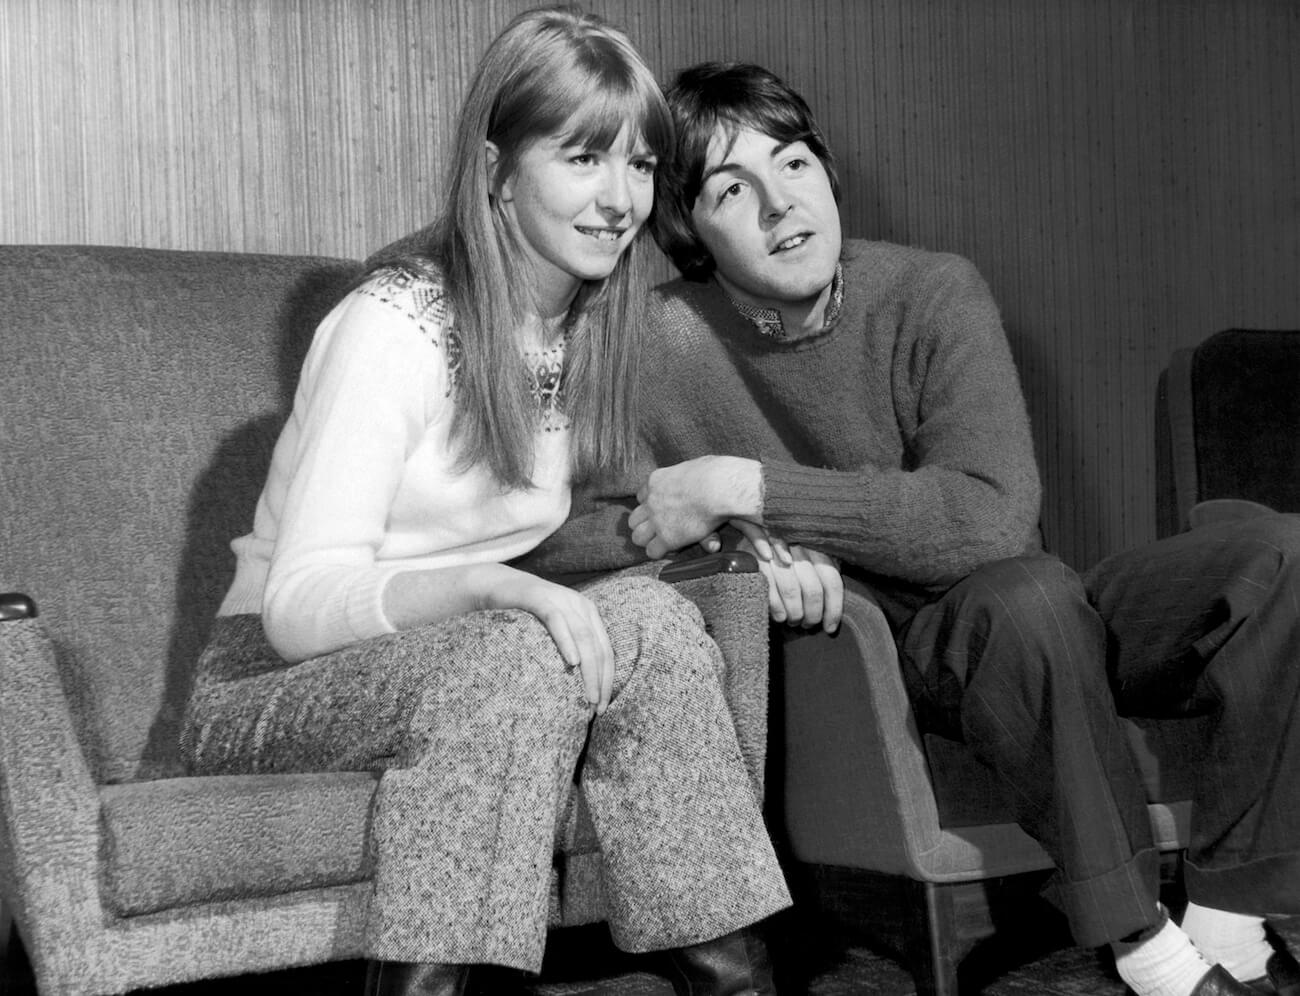 Paul McCartney and Jane Asher in Scotland in 1967.